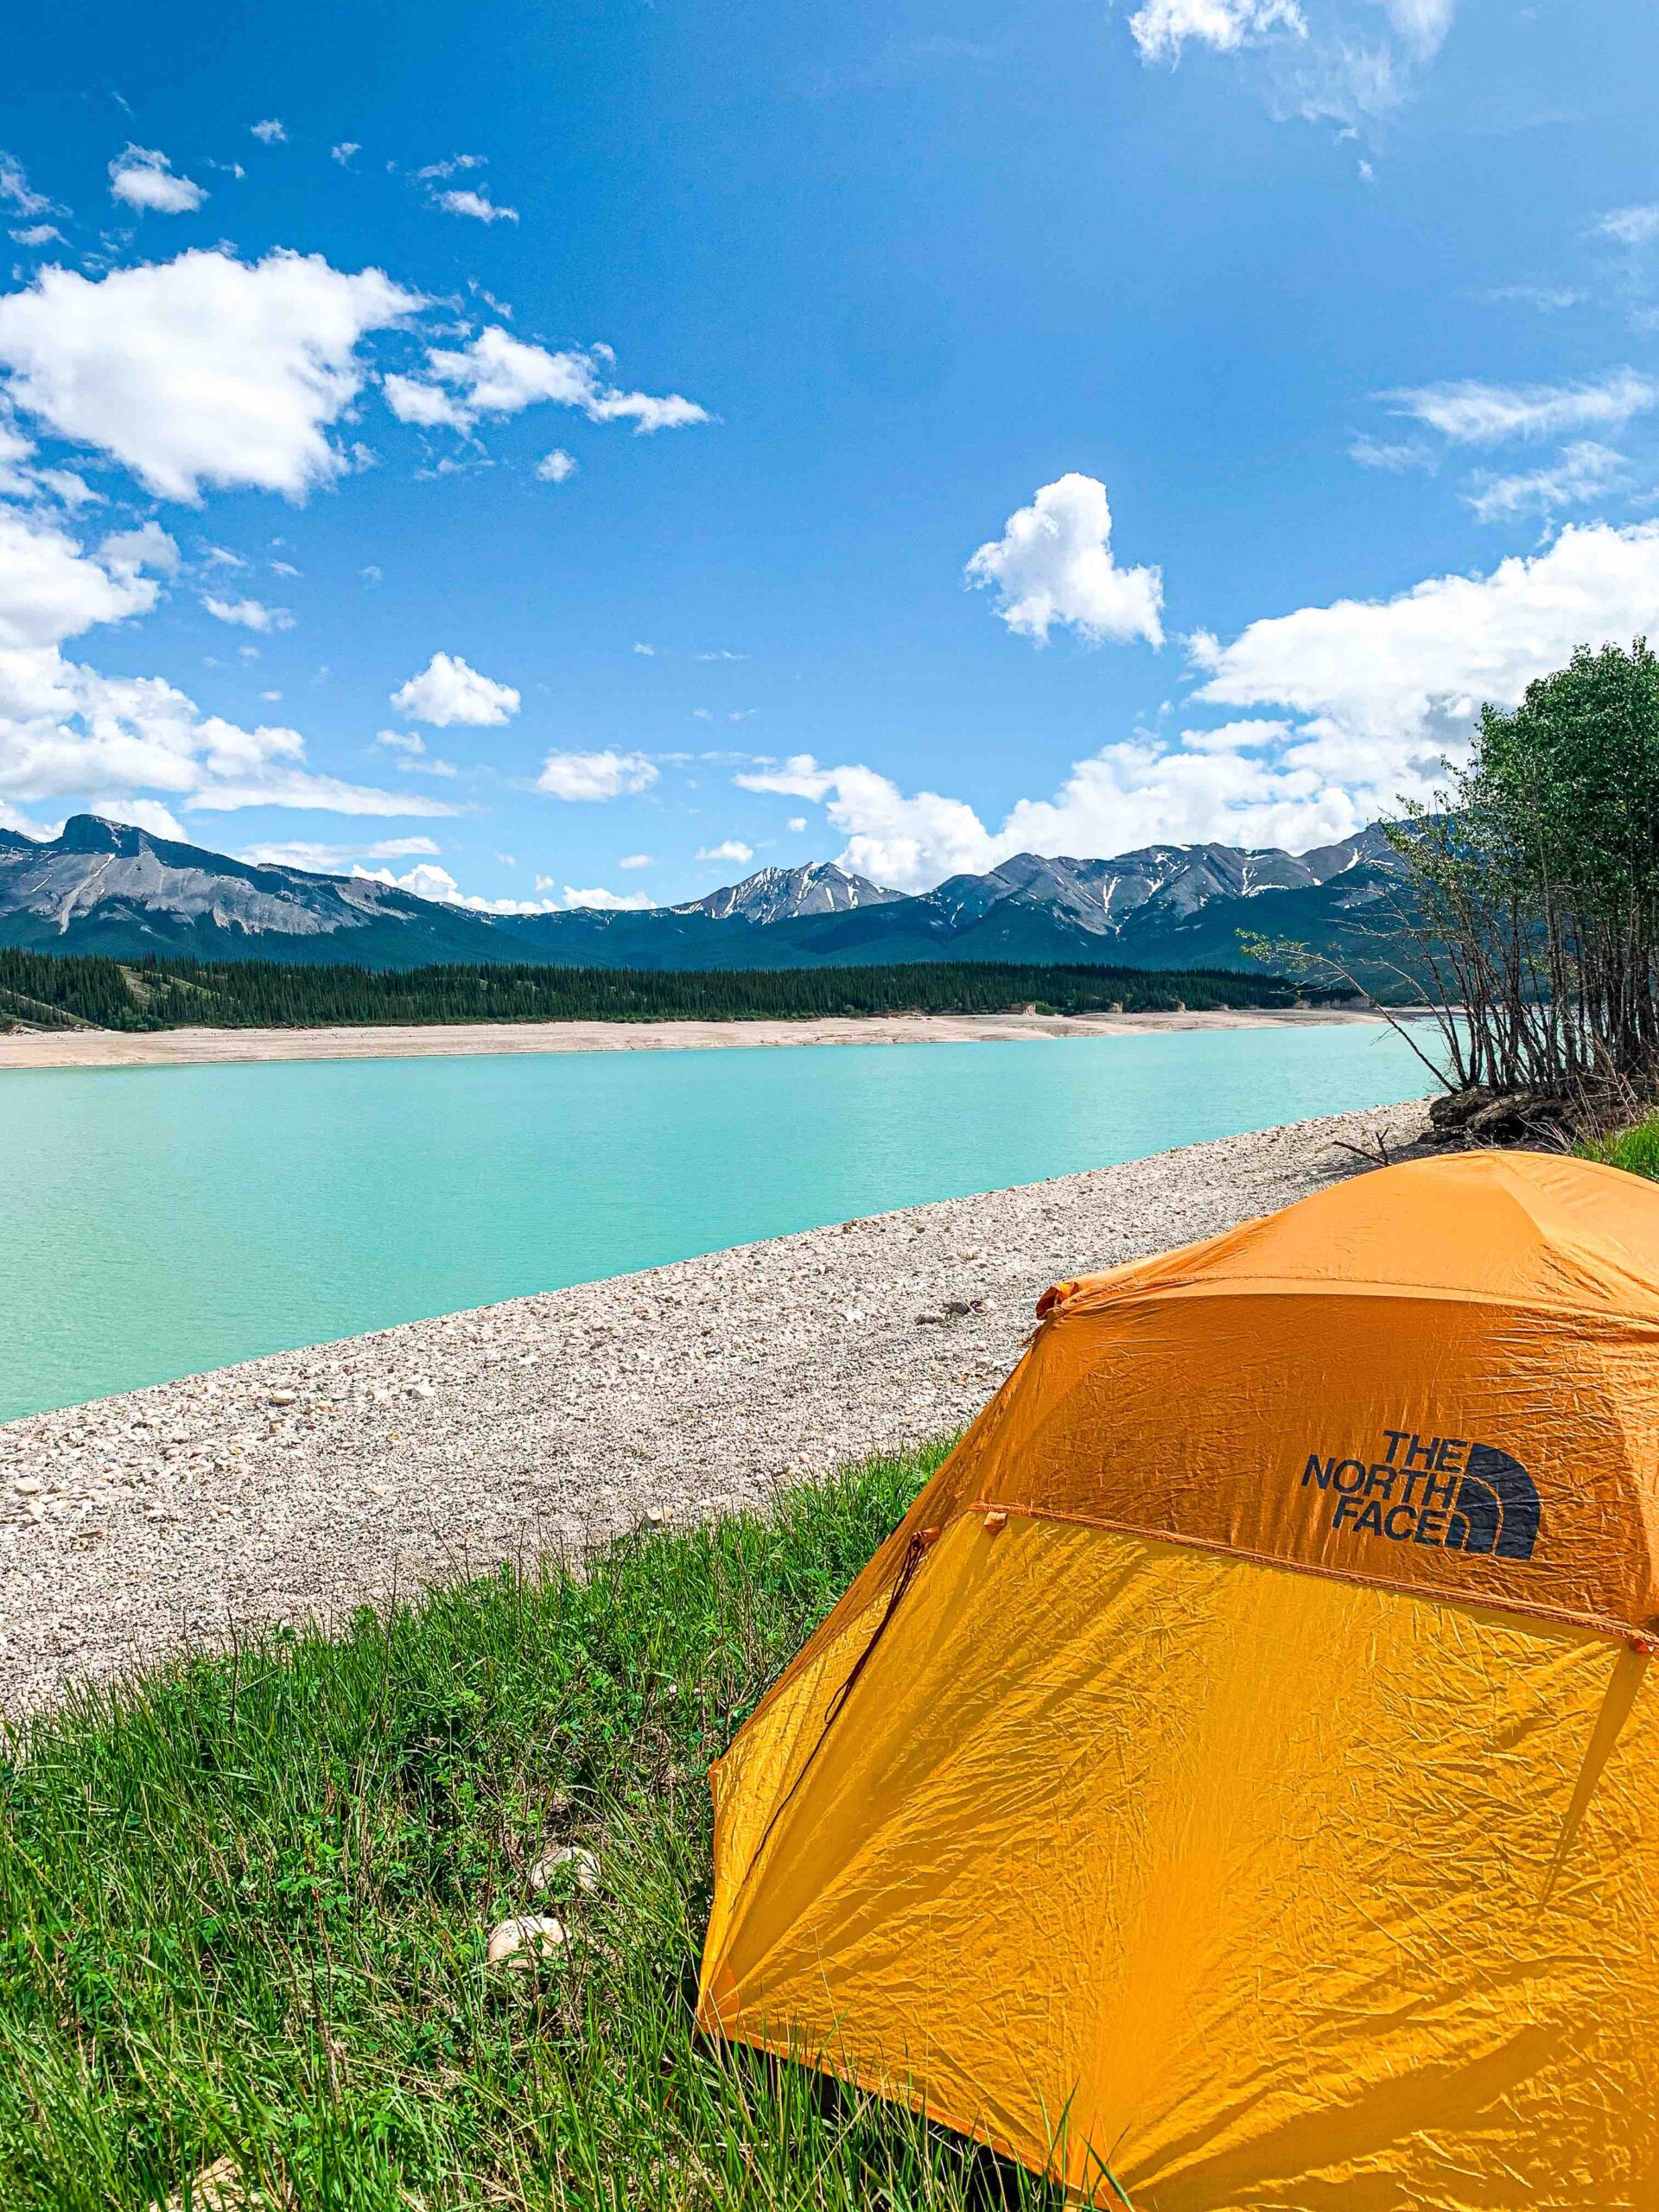 Views from the tent while camping at Abraham Lake